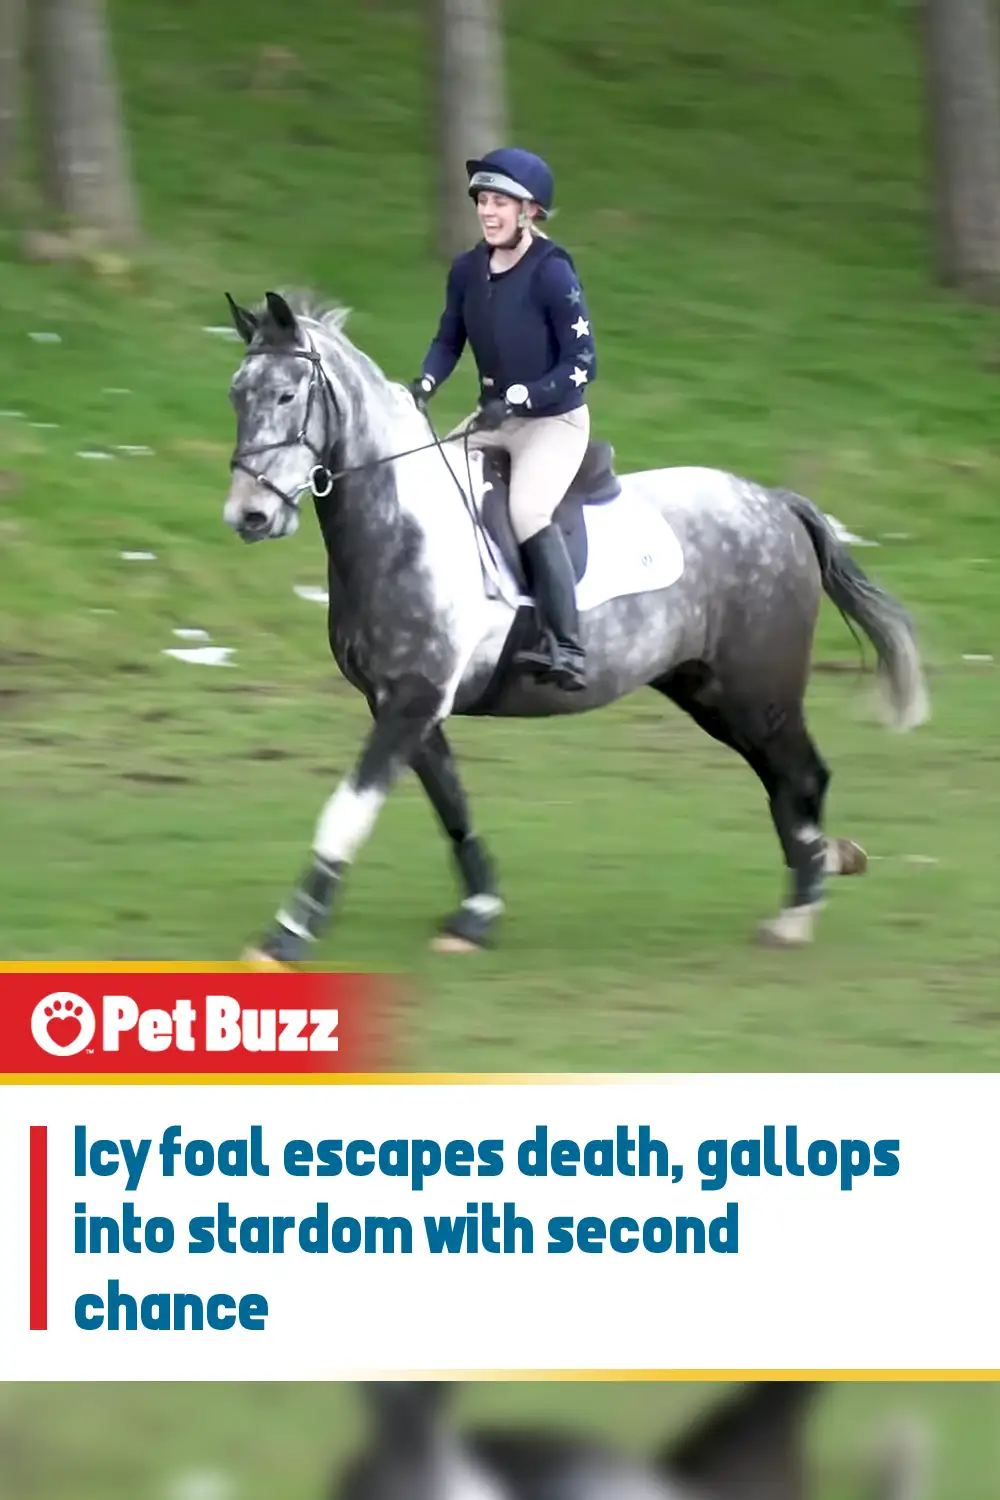 Icy foal escapes death, gallops into stardom with second chance